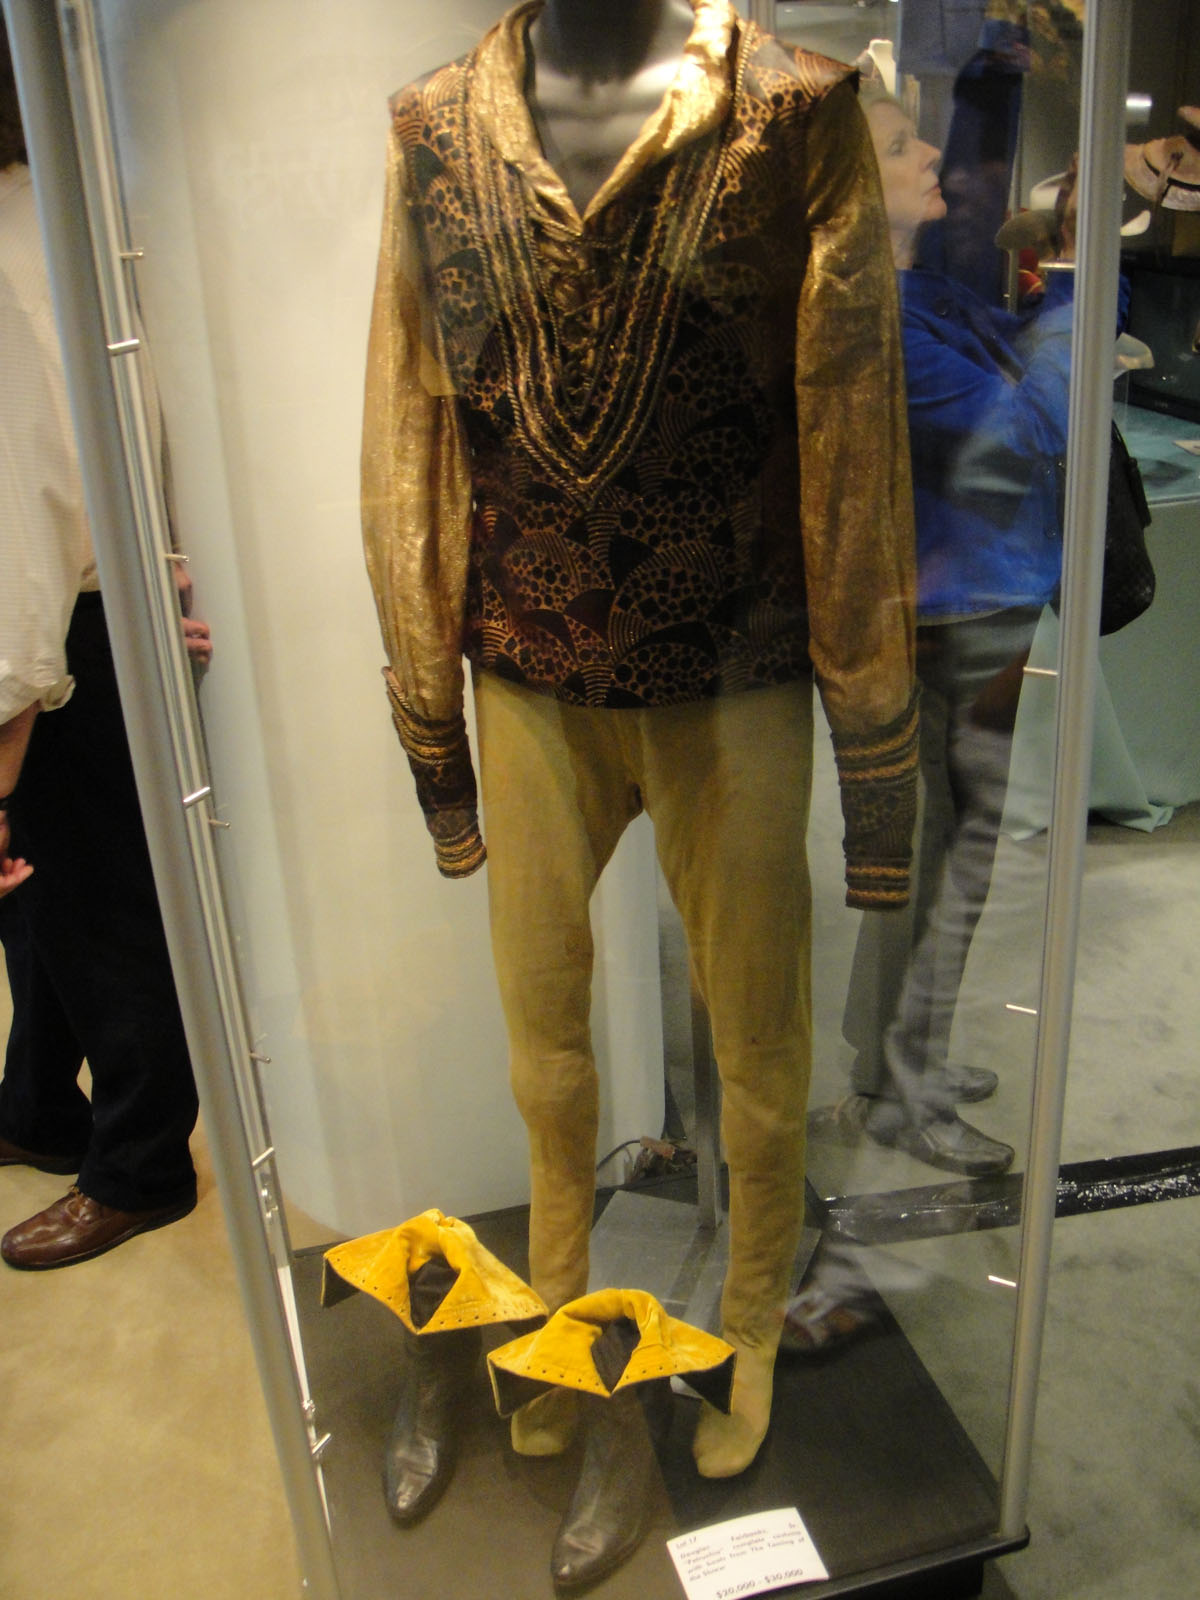 mass widower Tweet File:Debbie Reynolds Auction - Douglas Fairbanks Sr "Petruchio" complete  costume with boots from "The Taming of the Shrew".jpg - Wikimedia Commons